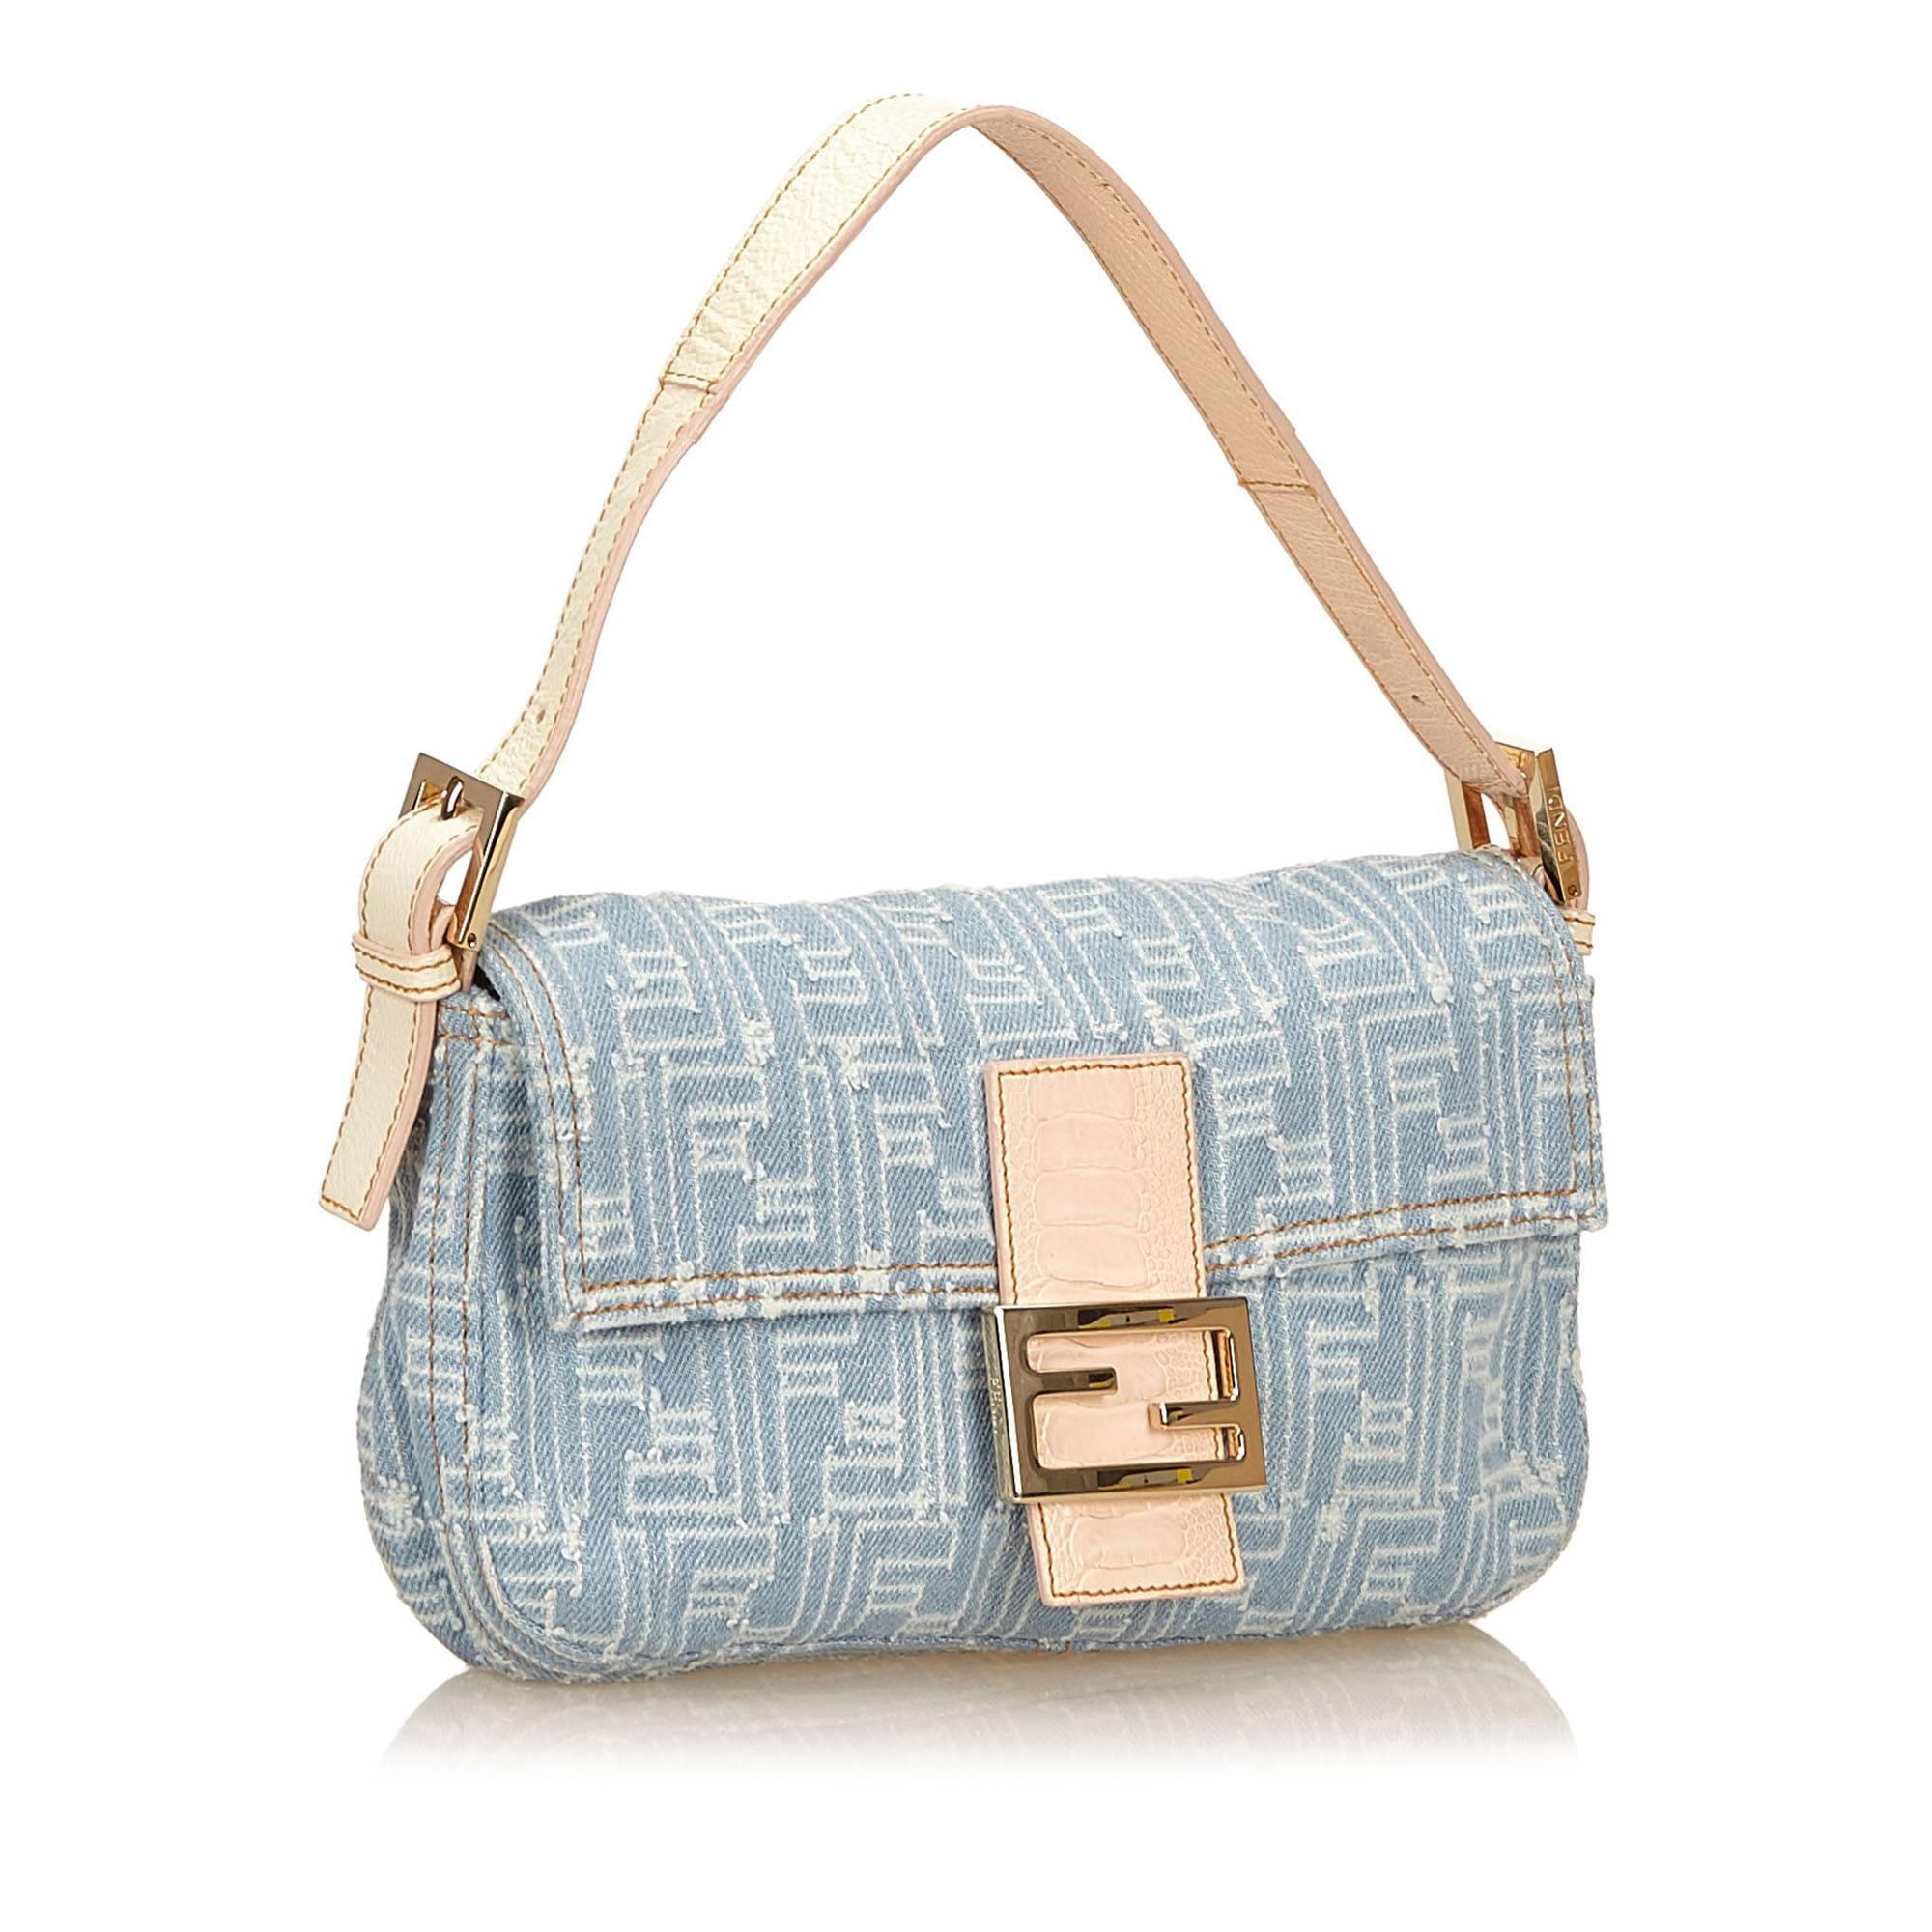 This handbag features a jacquard body, a flat shoulder strap, a top flap, and an interior zip pocket. It carries a B condition rating.

Inclusions: 
Dust Bag